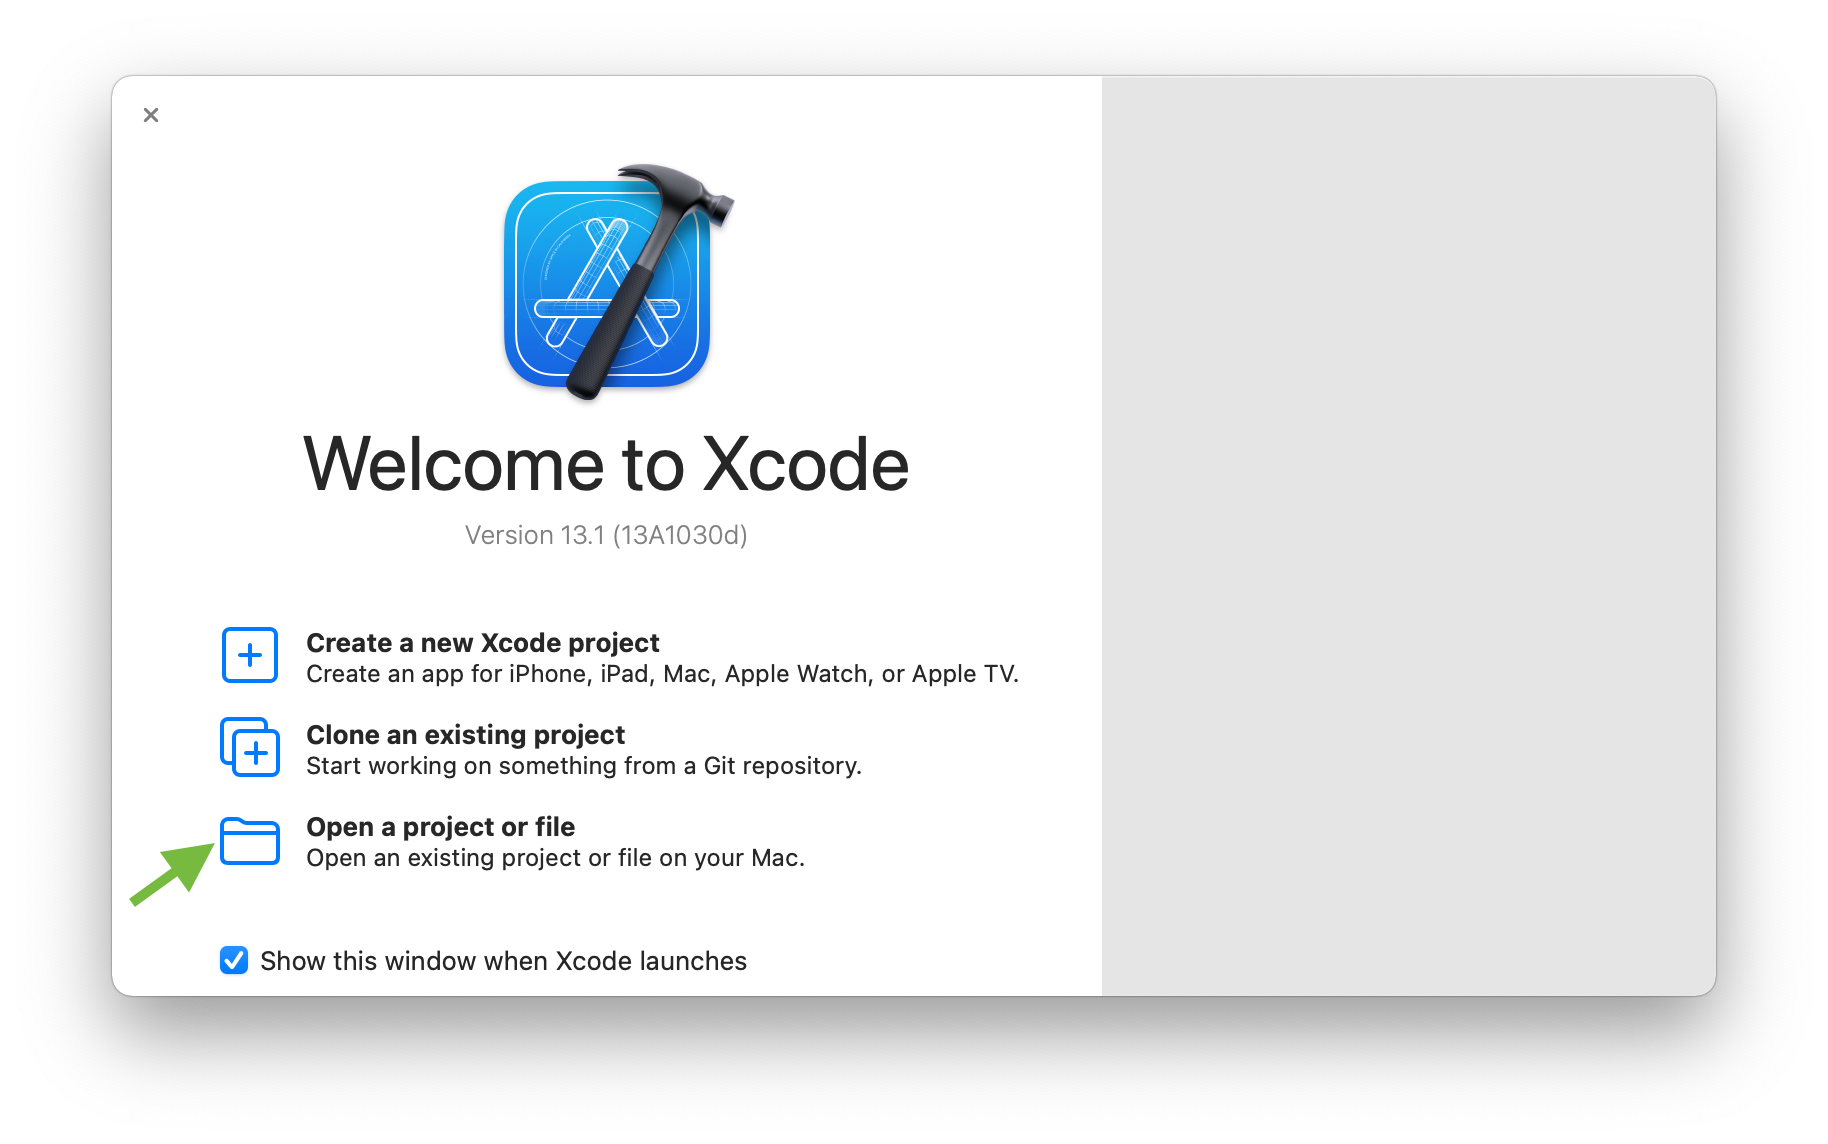 Open a Project on Xcode